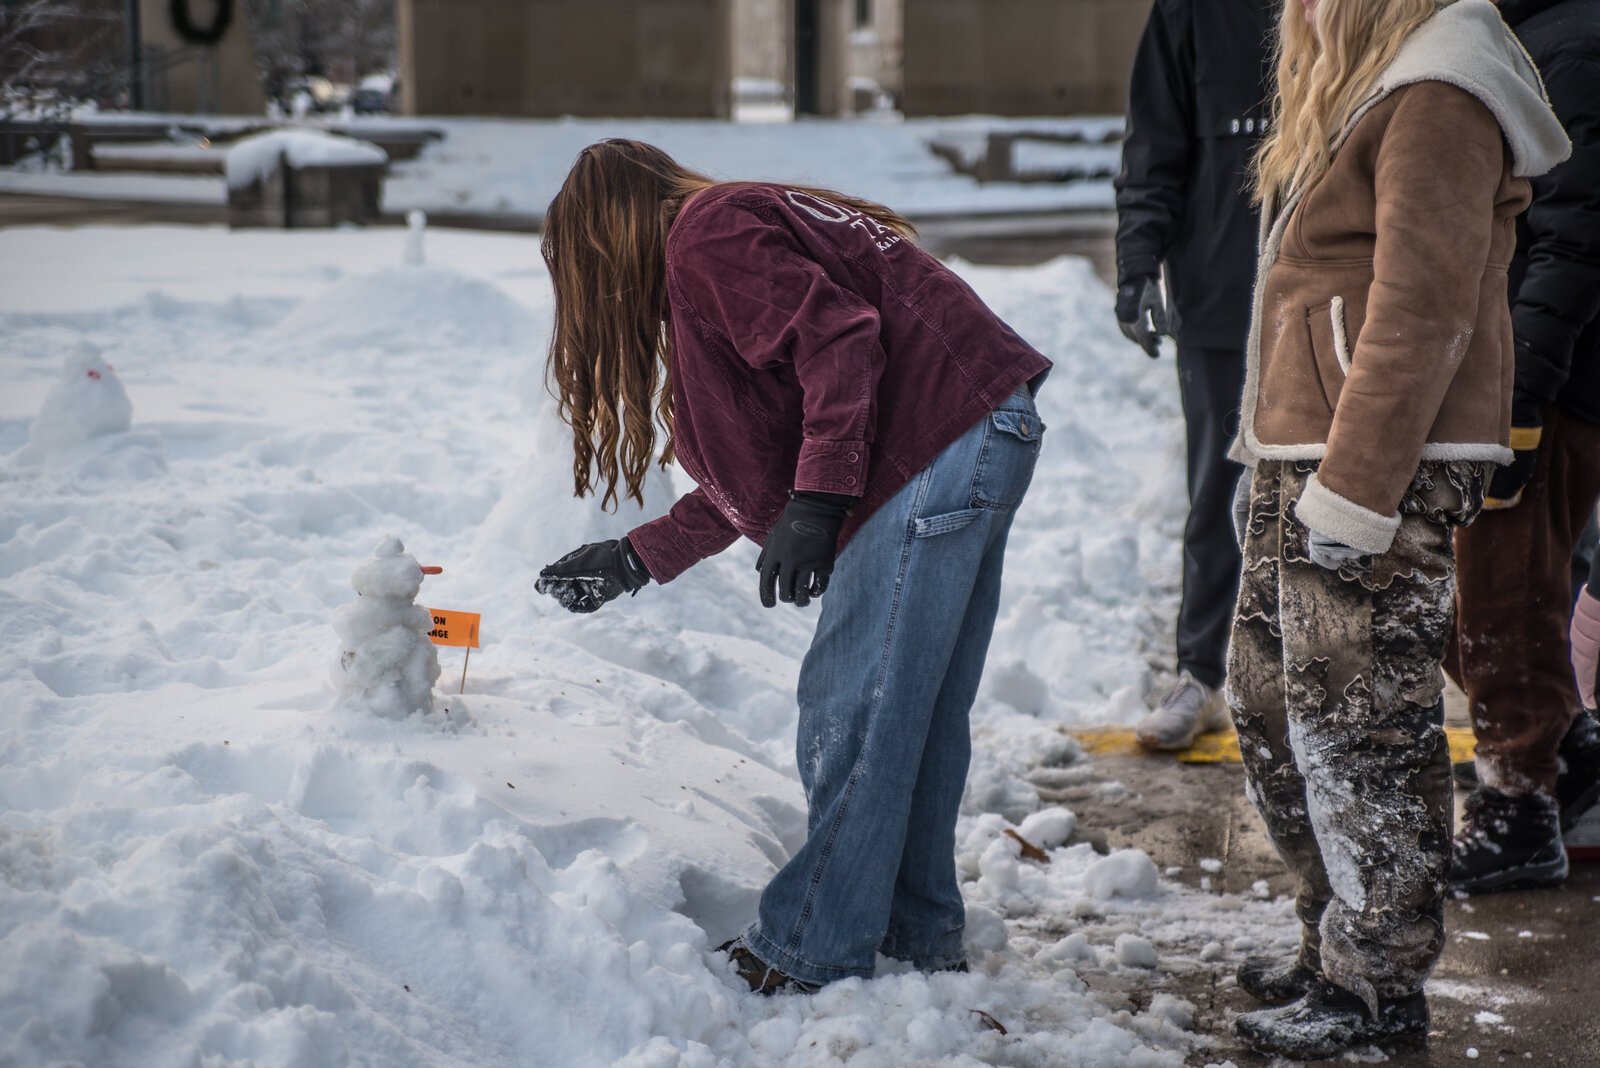 Students built mini snowpeople throughout Bronson Park and on the steps of City Hall.